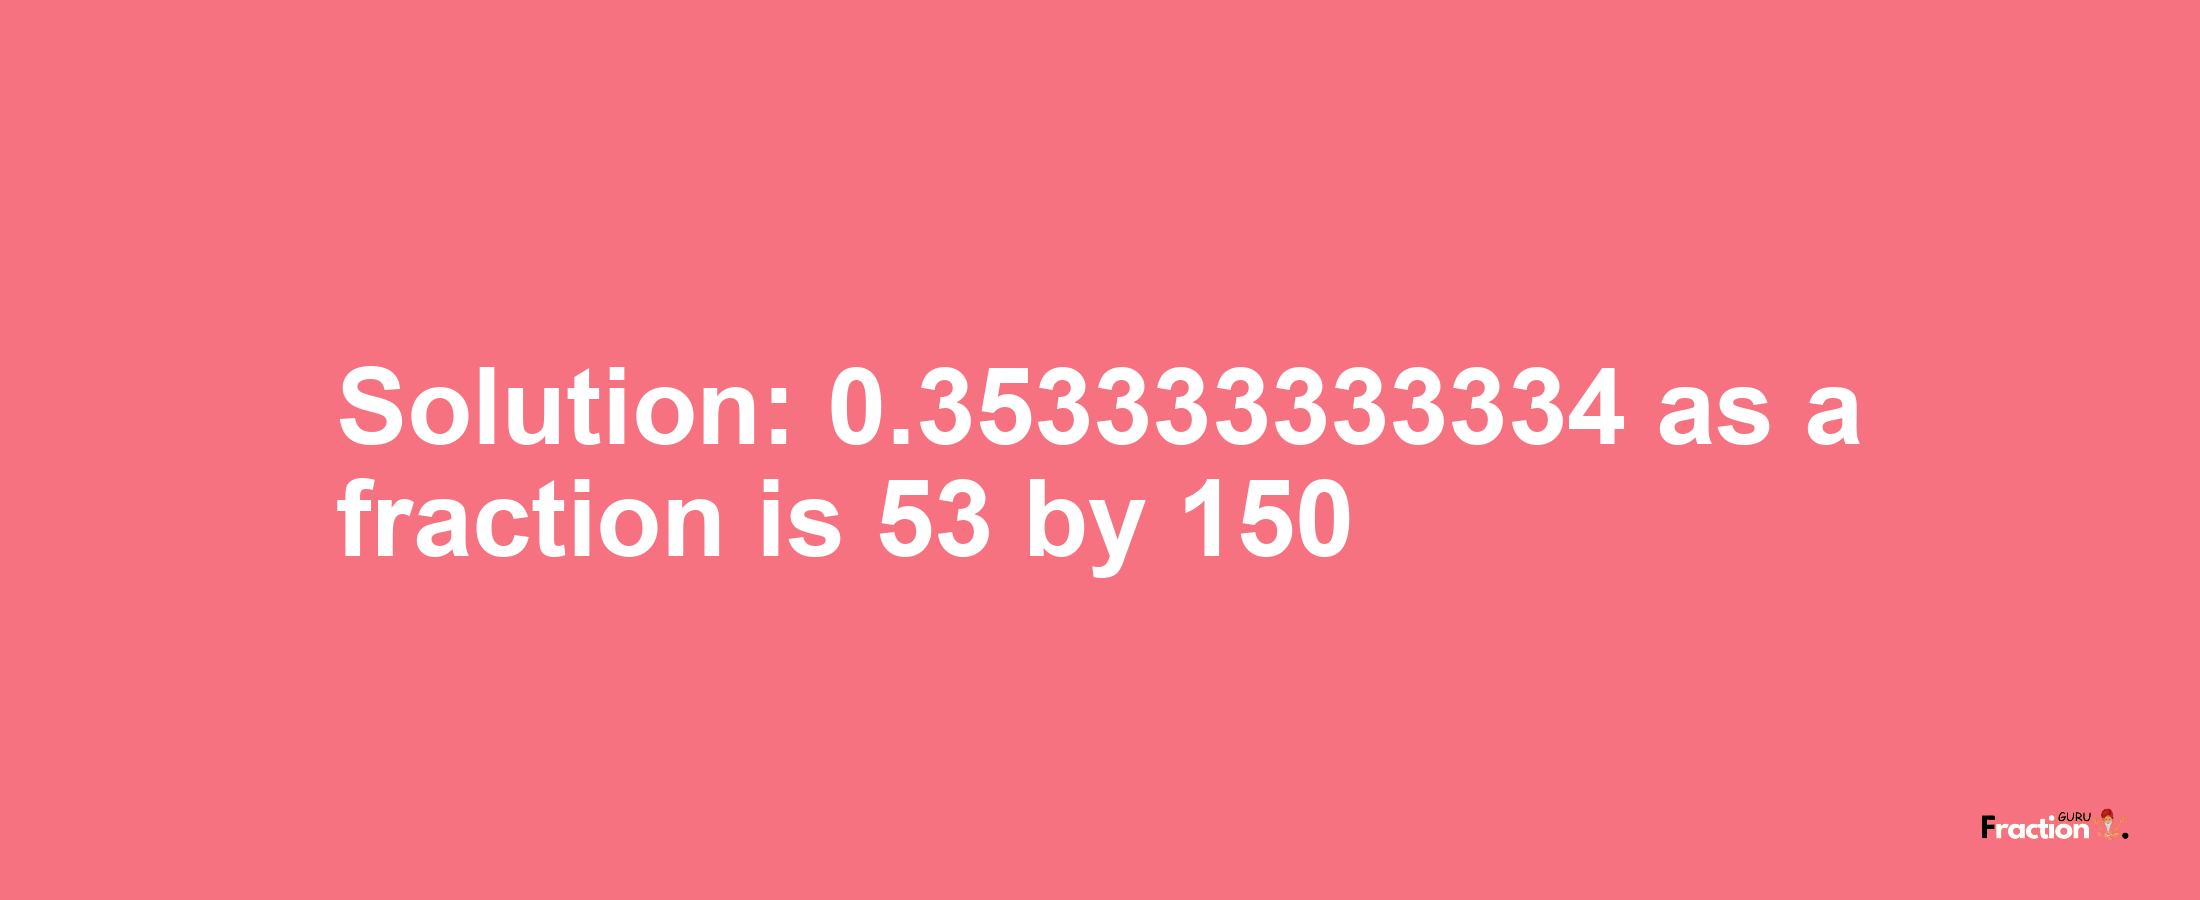 Solution:0.353333333334 as a fraction is 53/150